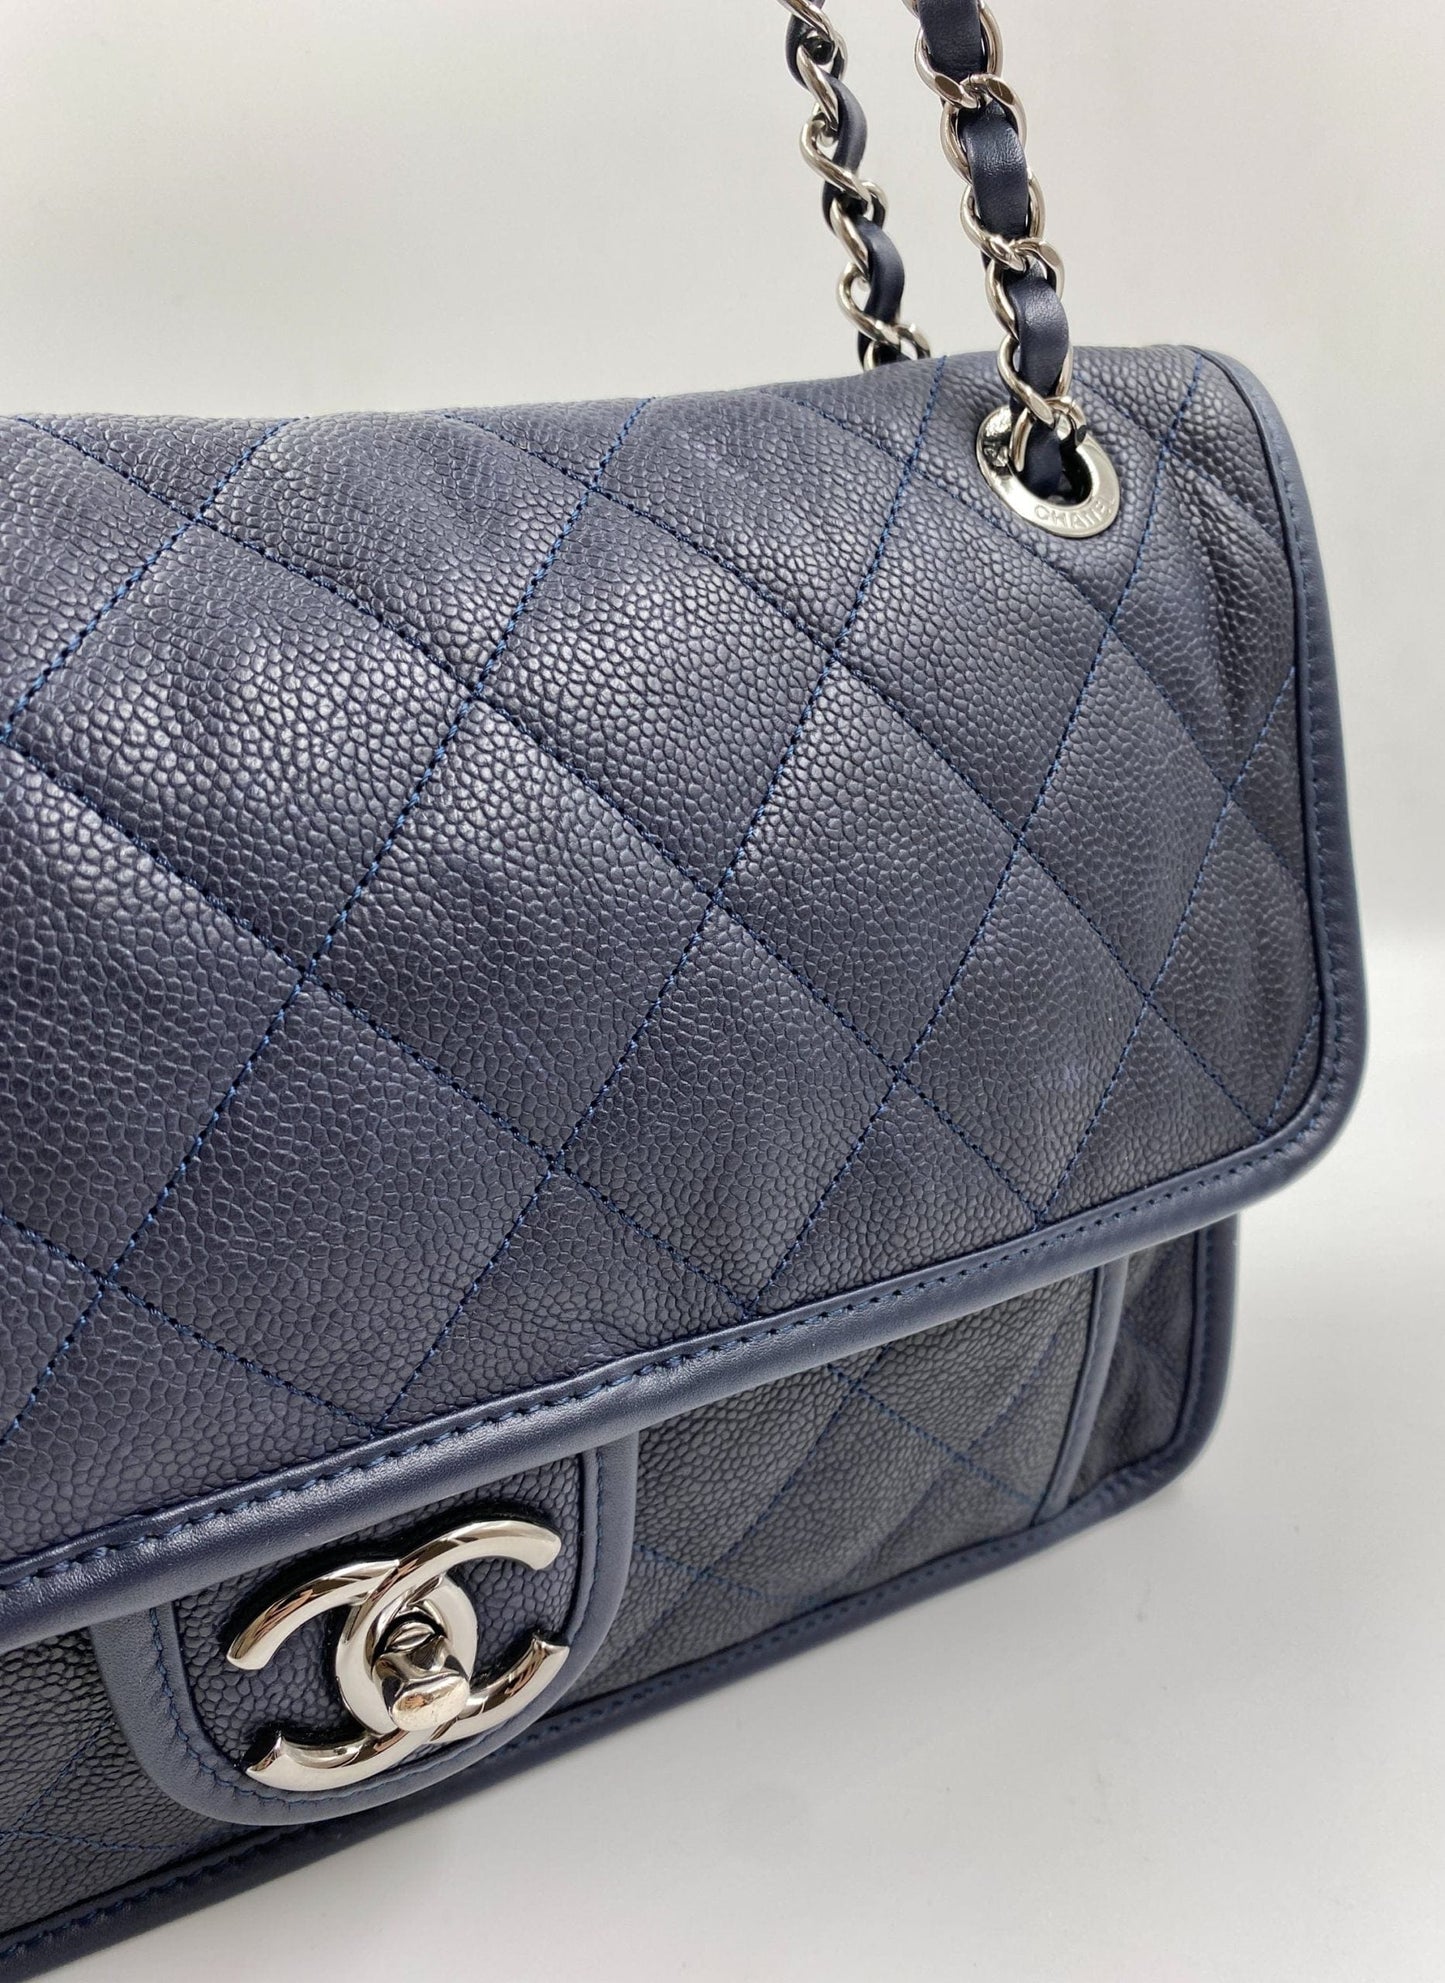 Chanel French Riviera in Beige Quilted Calfskin with Ruthenium Hardware -  SOLD